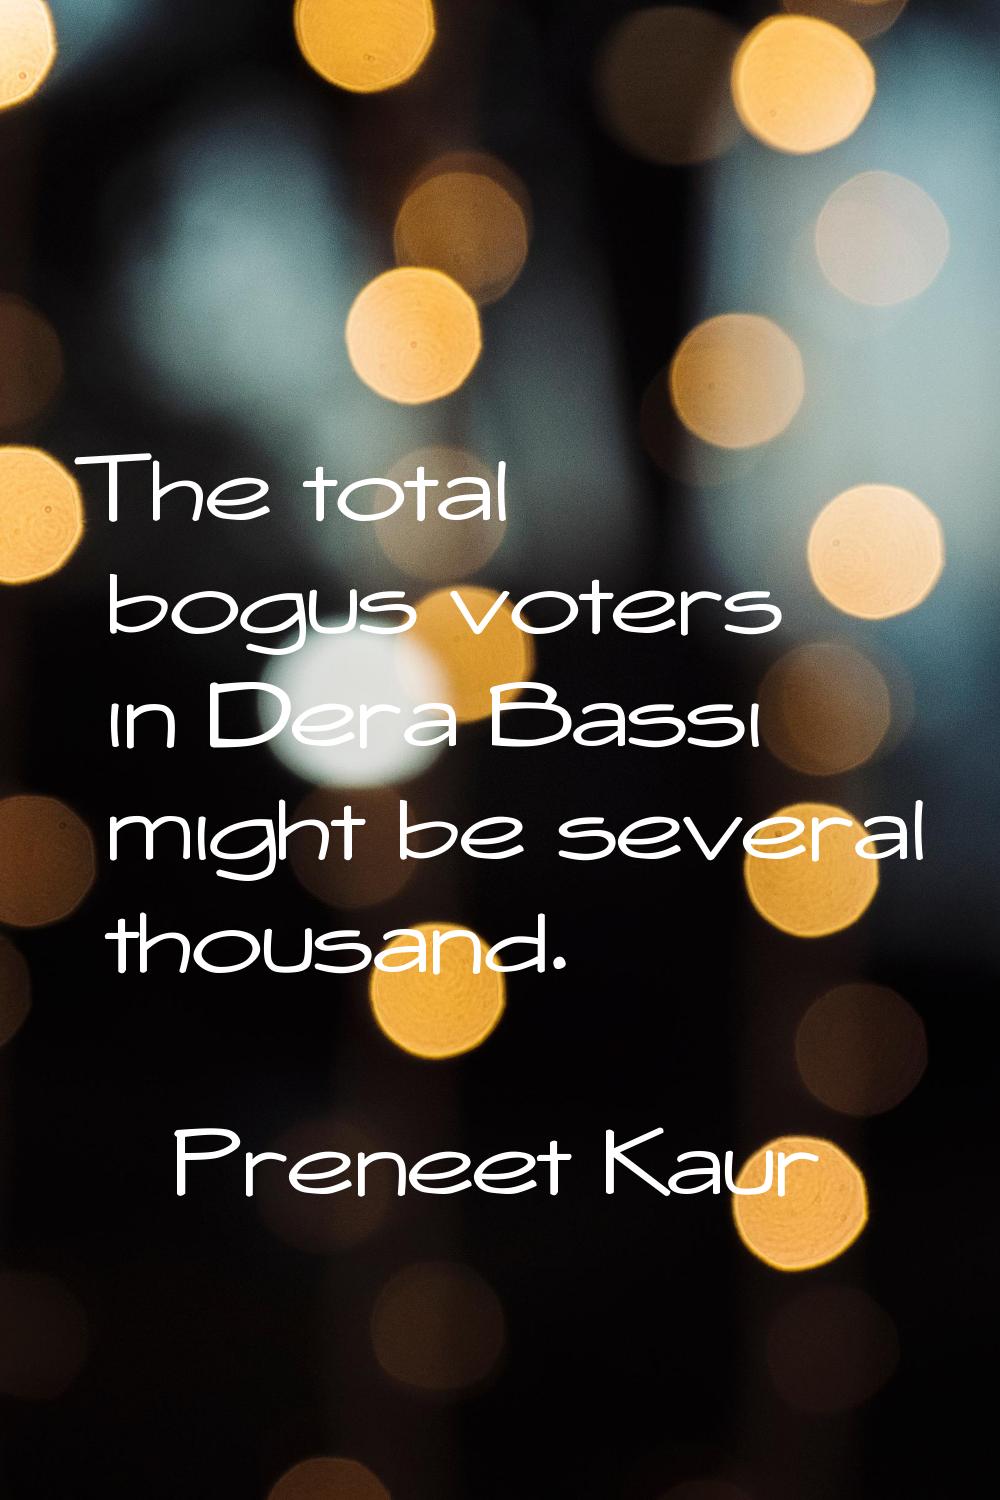 The total bogus voters in Dera Bassi might be several thousand.